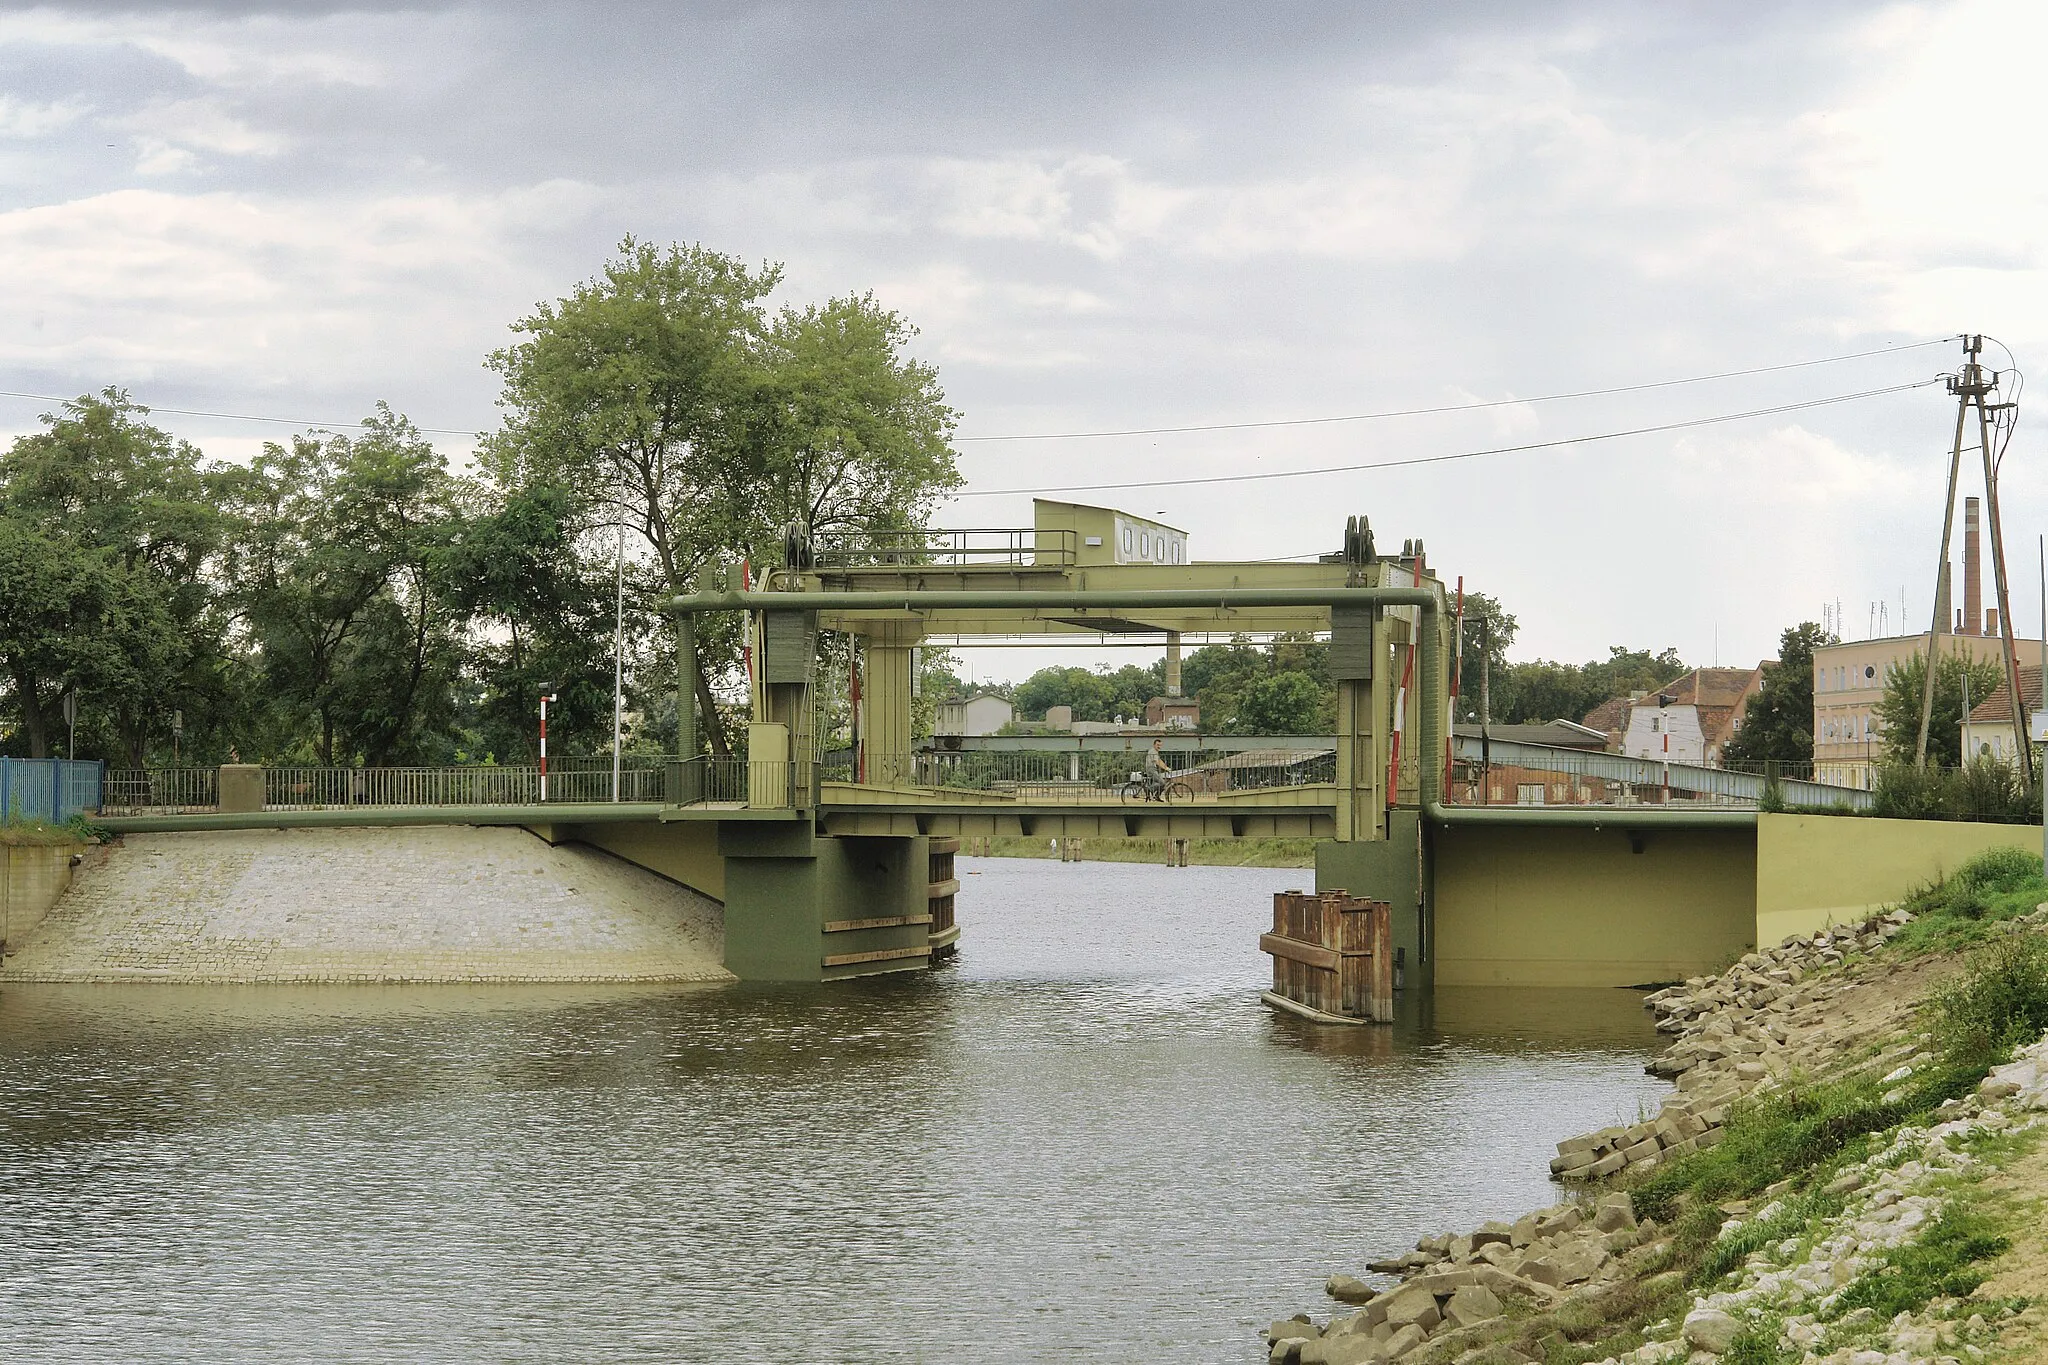 Photo showing: The vertical-lift bridge in Nowa Sól, Poland